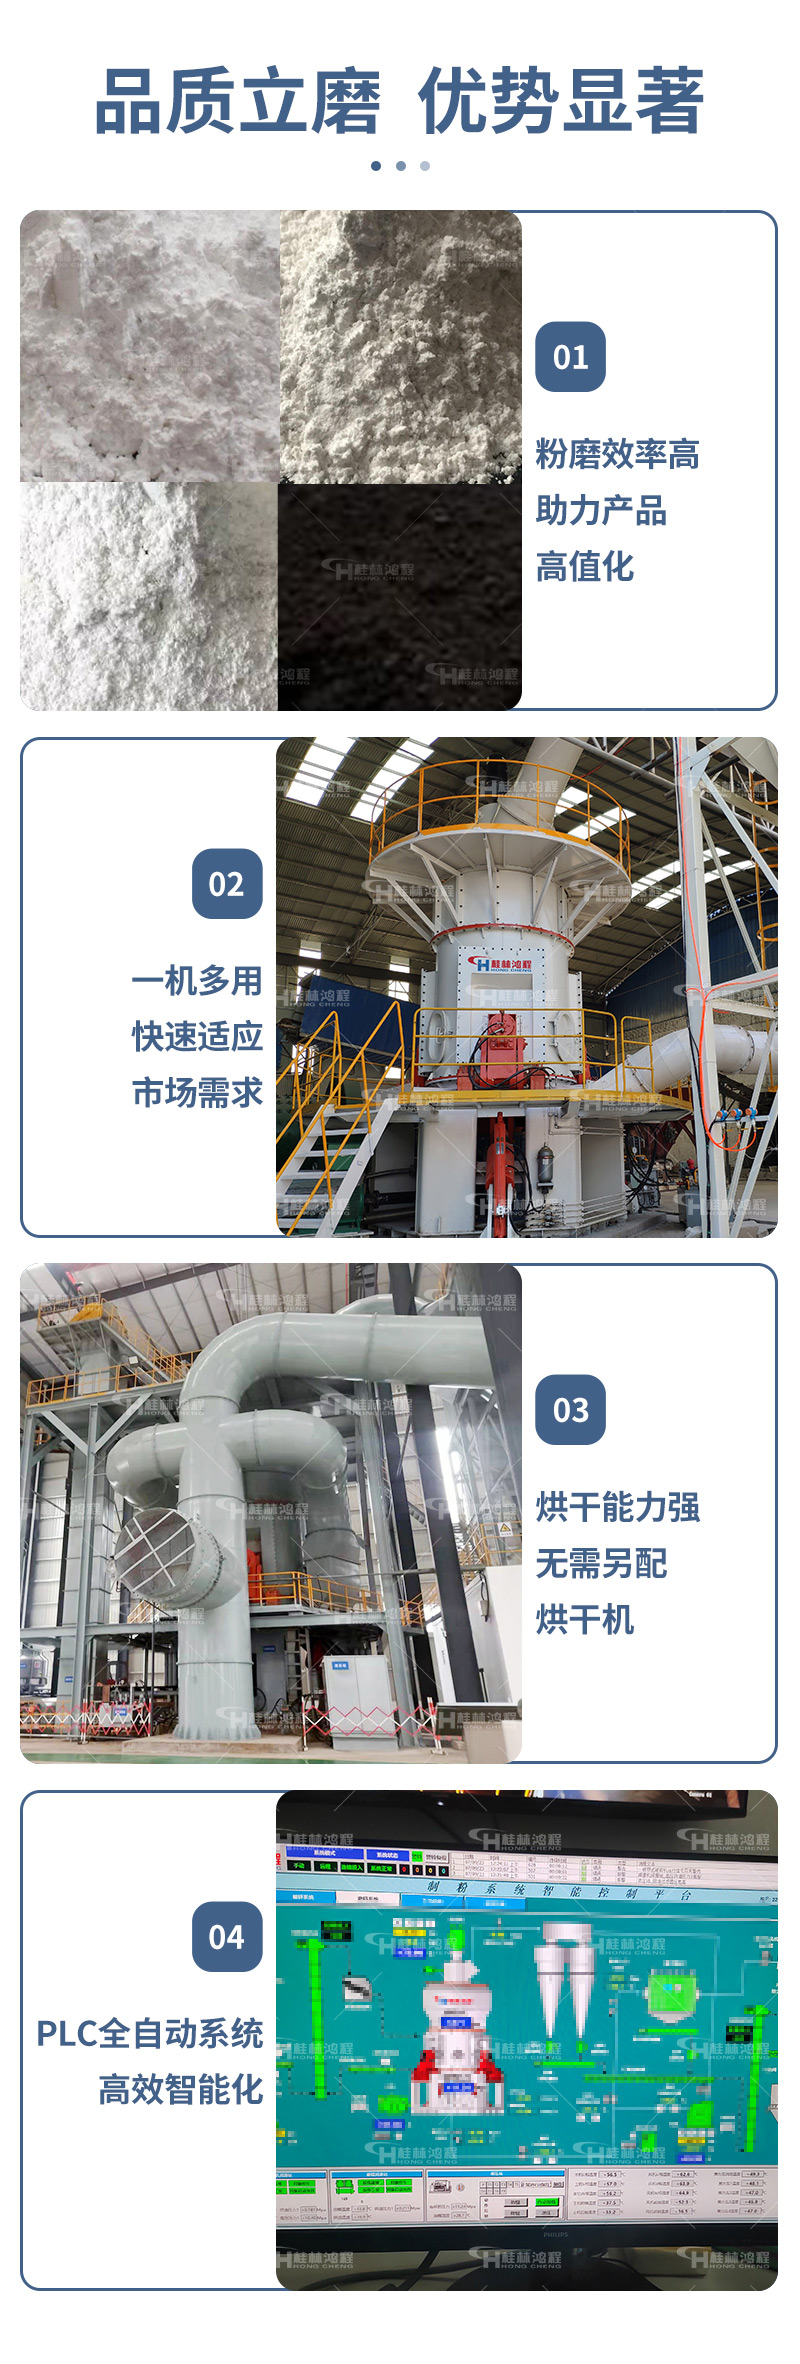 Production capacity of lgms4624 vertical mill for slag vertical grinding and fly ash grinding process flow